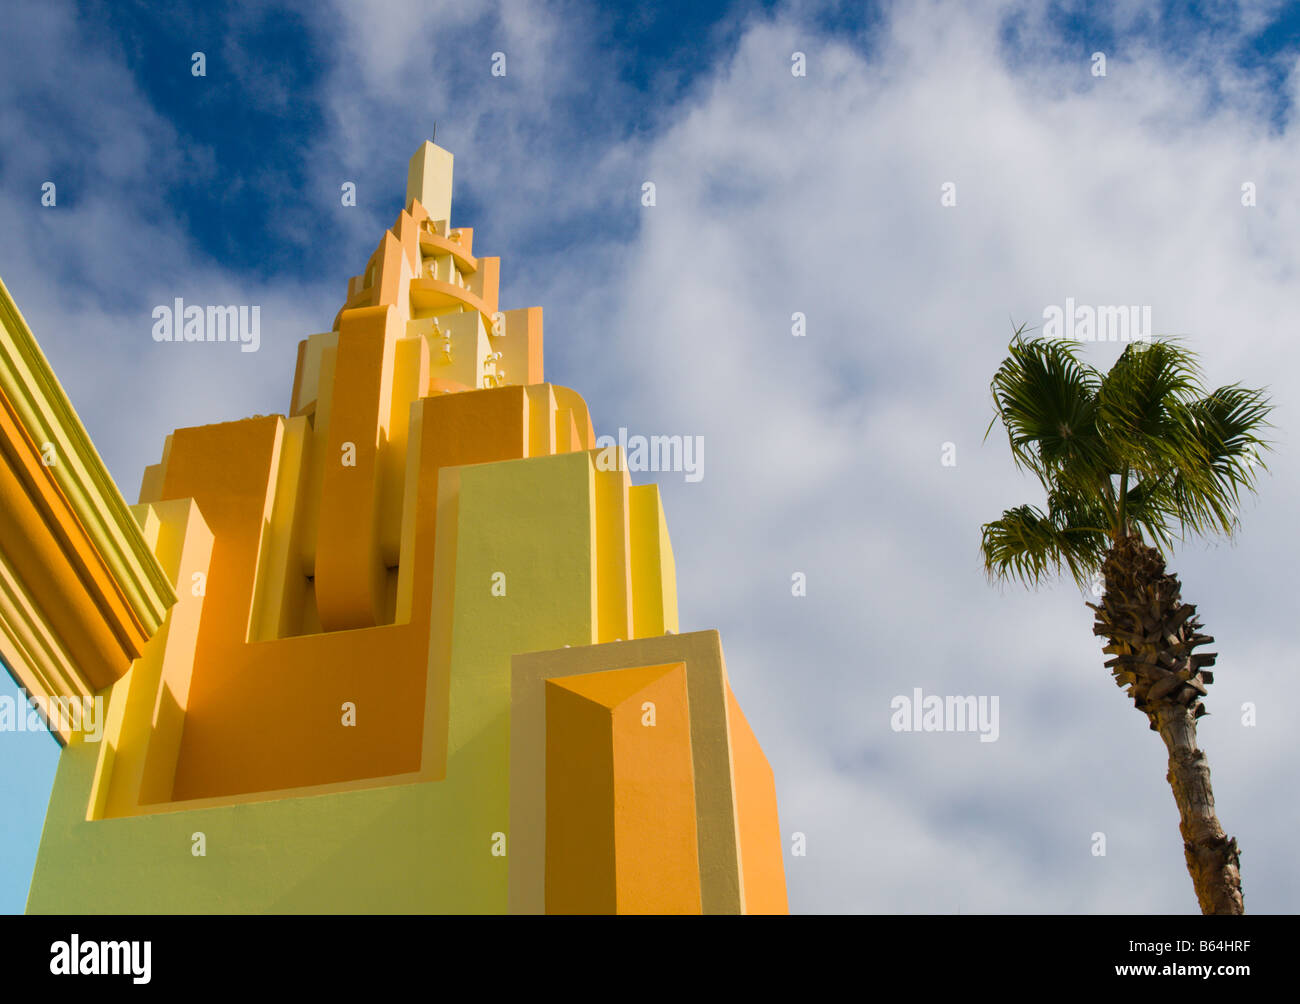 TOWER ON RON JON SURF SHOP IN COCOA BEACH IN FLORIDA Stock Photo